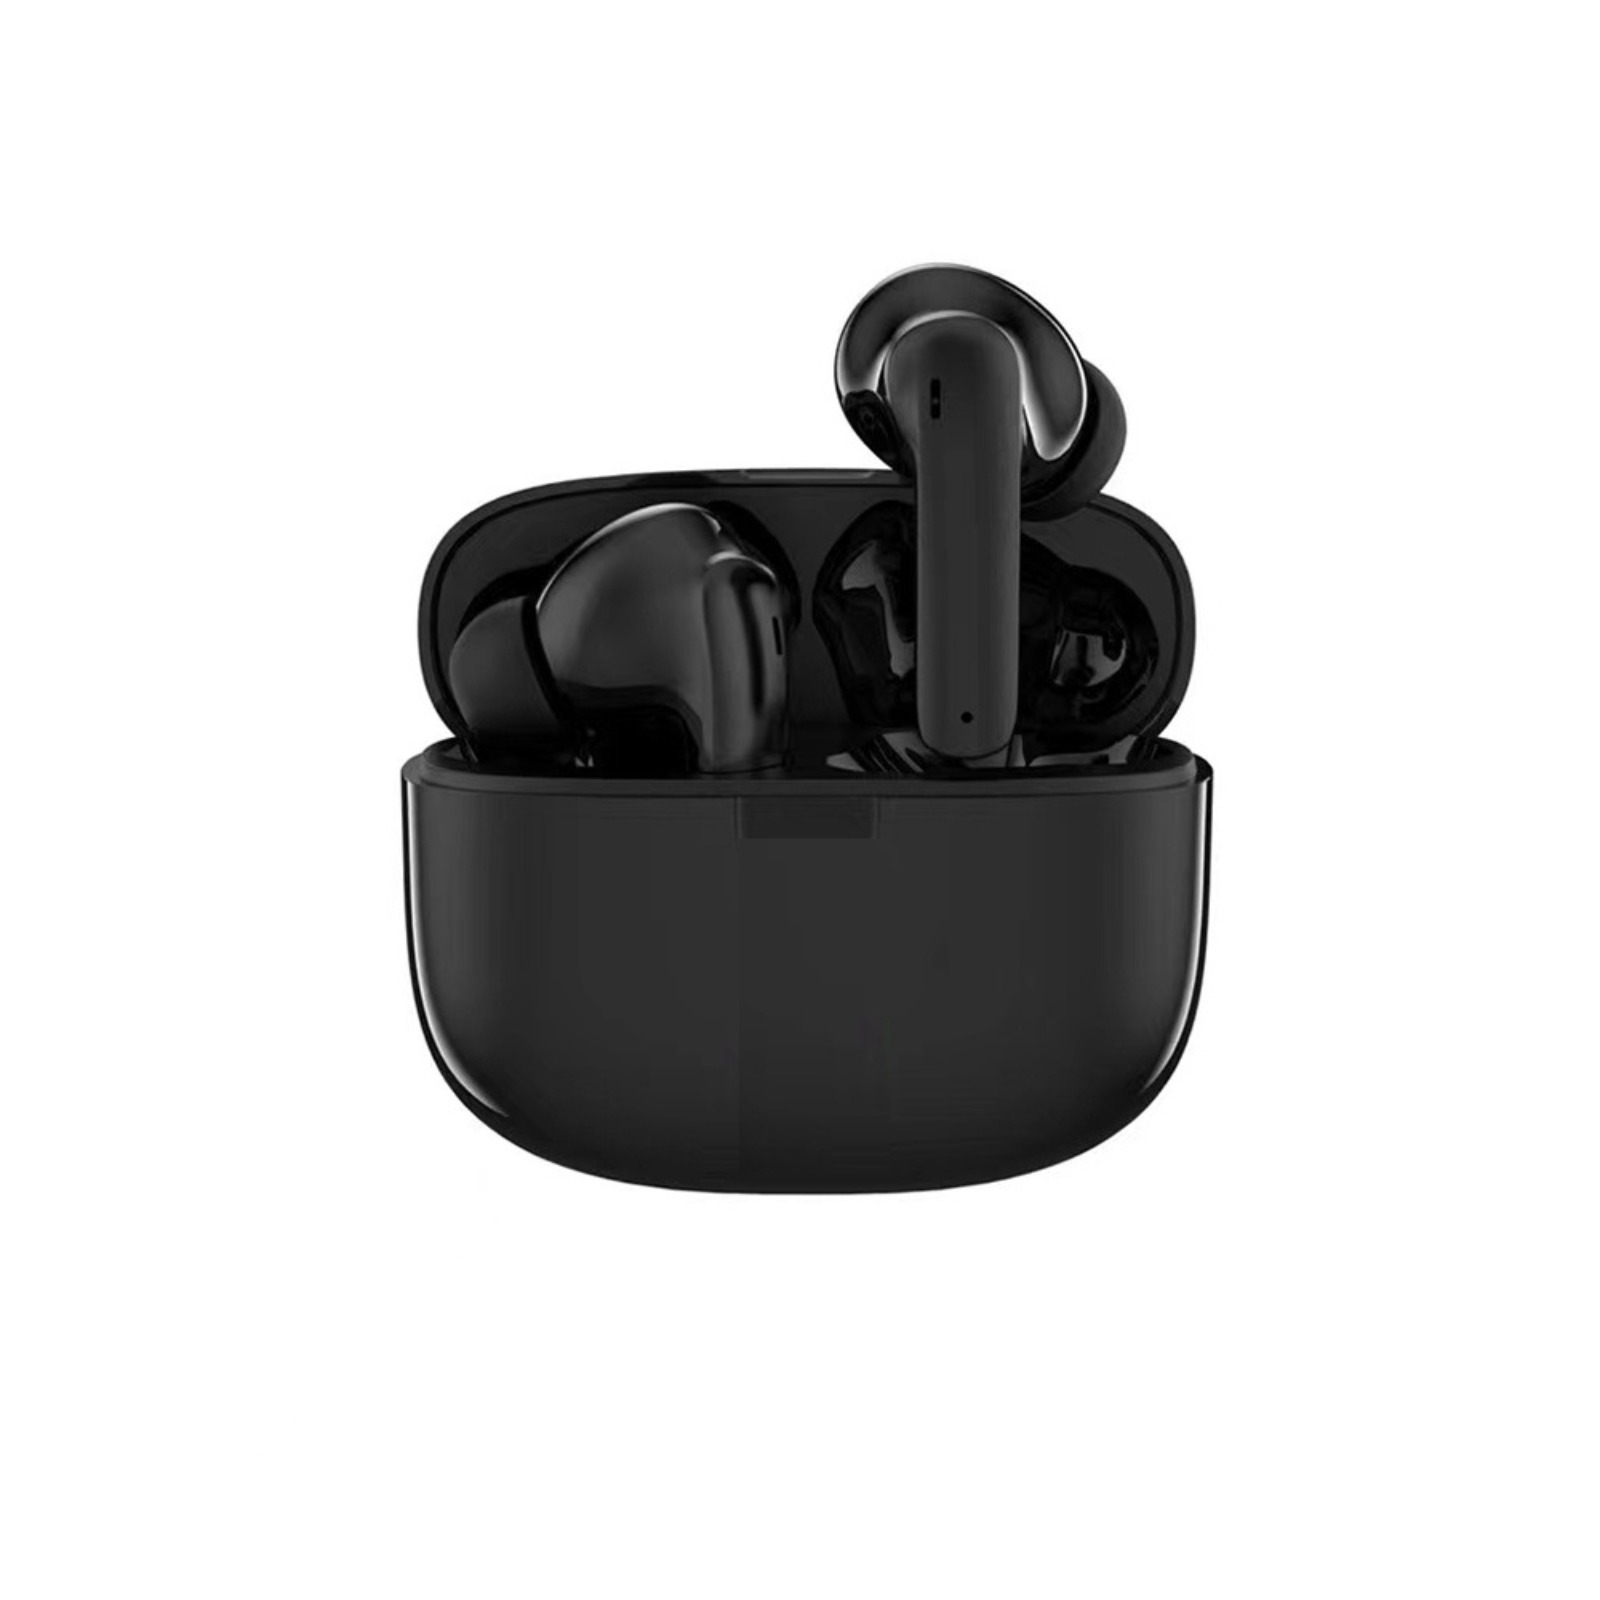 Versatile Wireless In-Ear Earbuds for All Devices